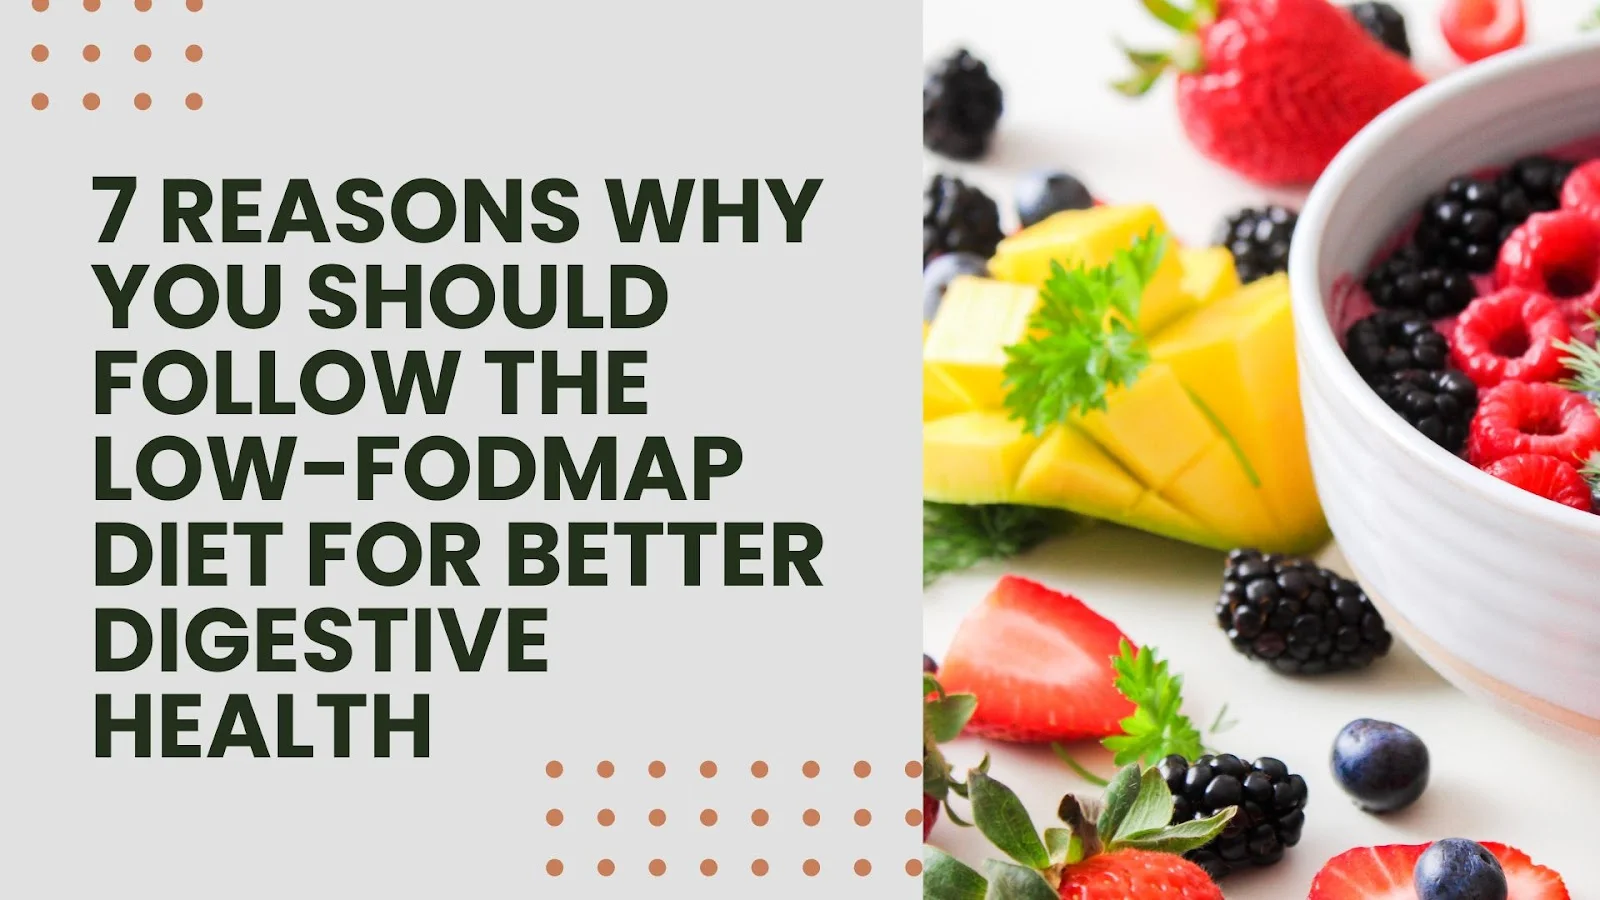 7 Reasons Why You Should Follow the Low FODMAP Diet for Better Digestive Health